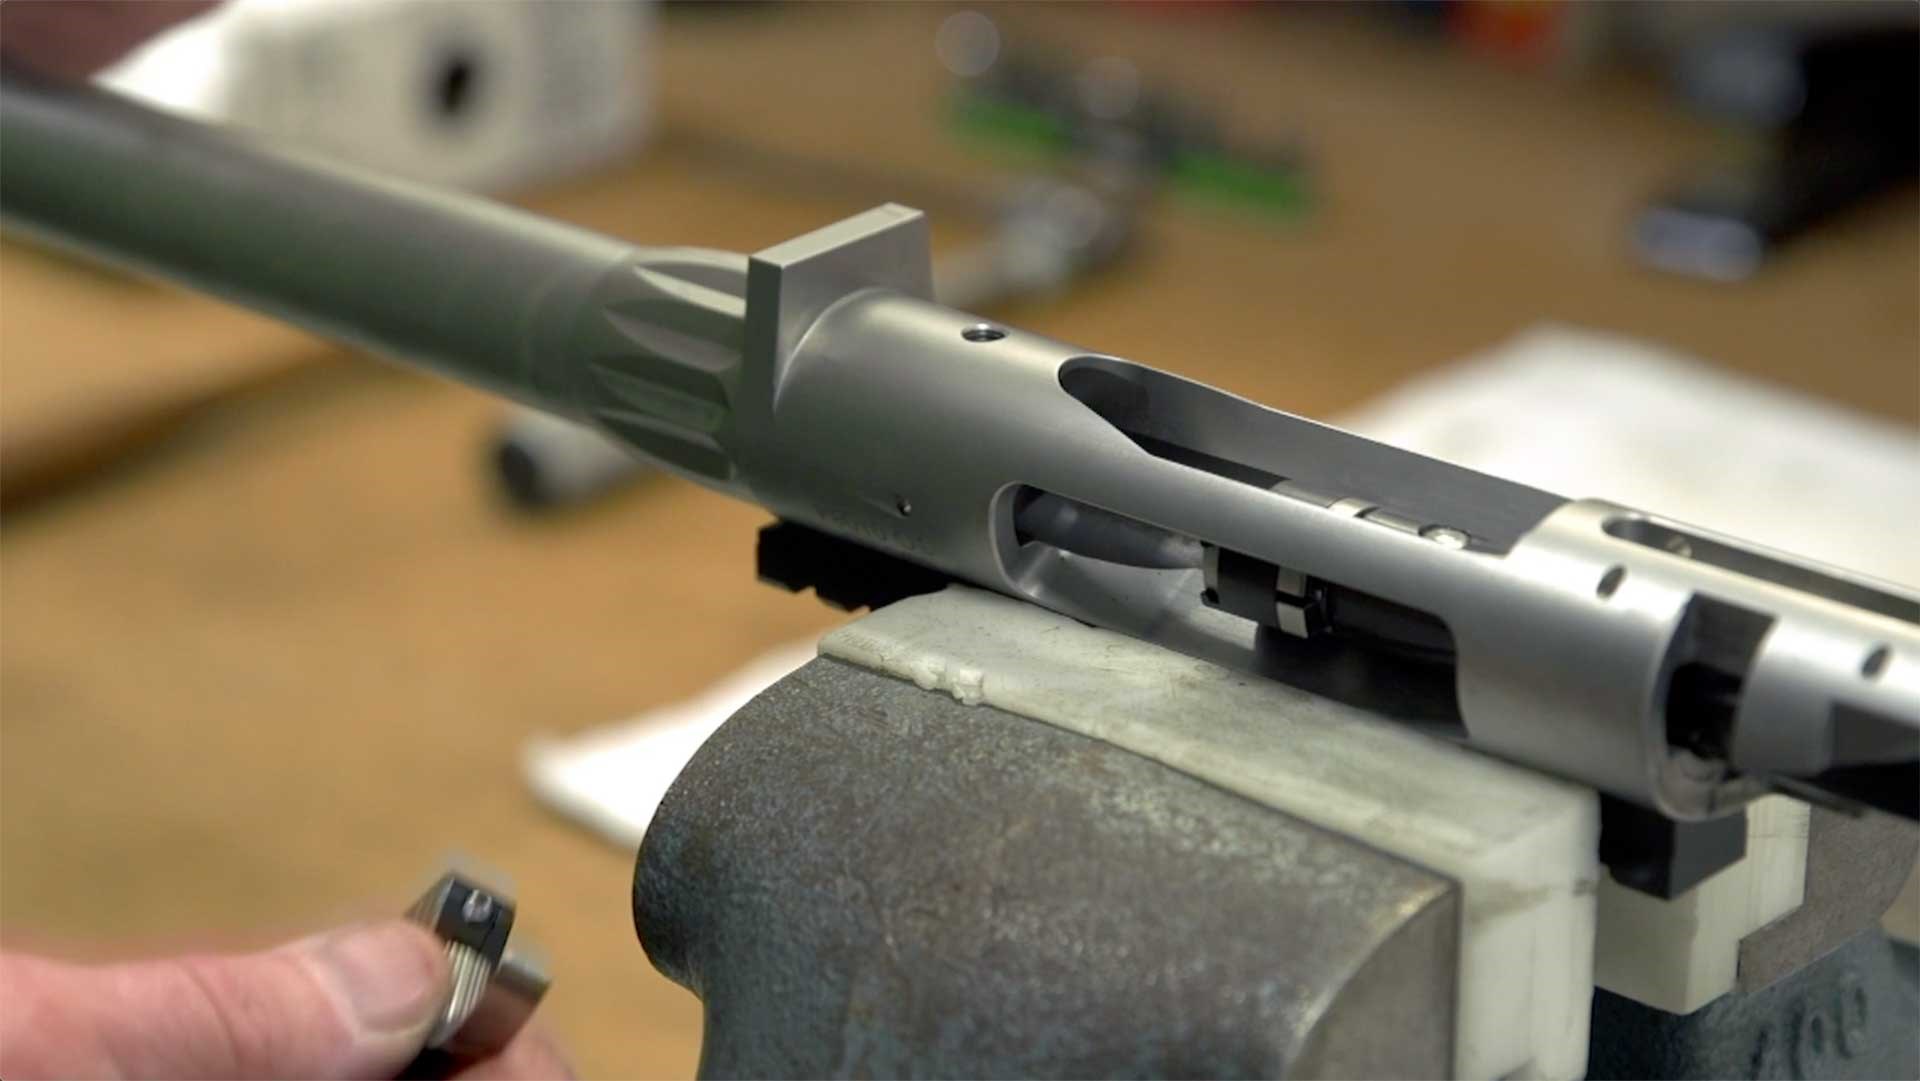 A Rock River Arms bolt-action rifle being assembled on a workbench.